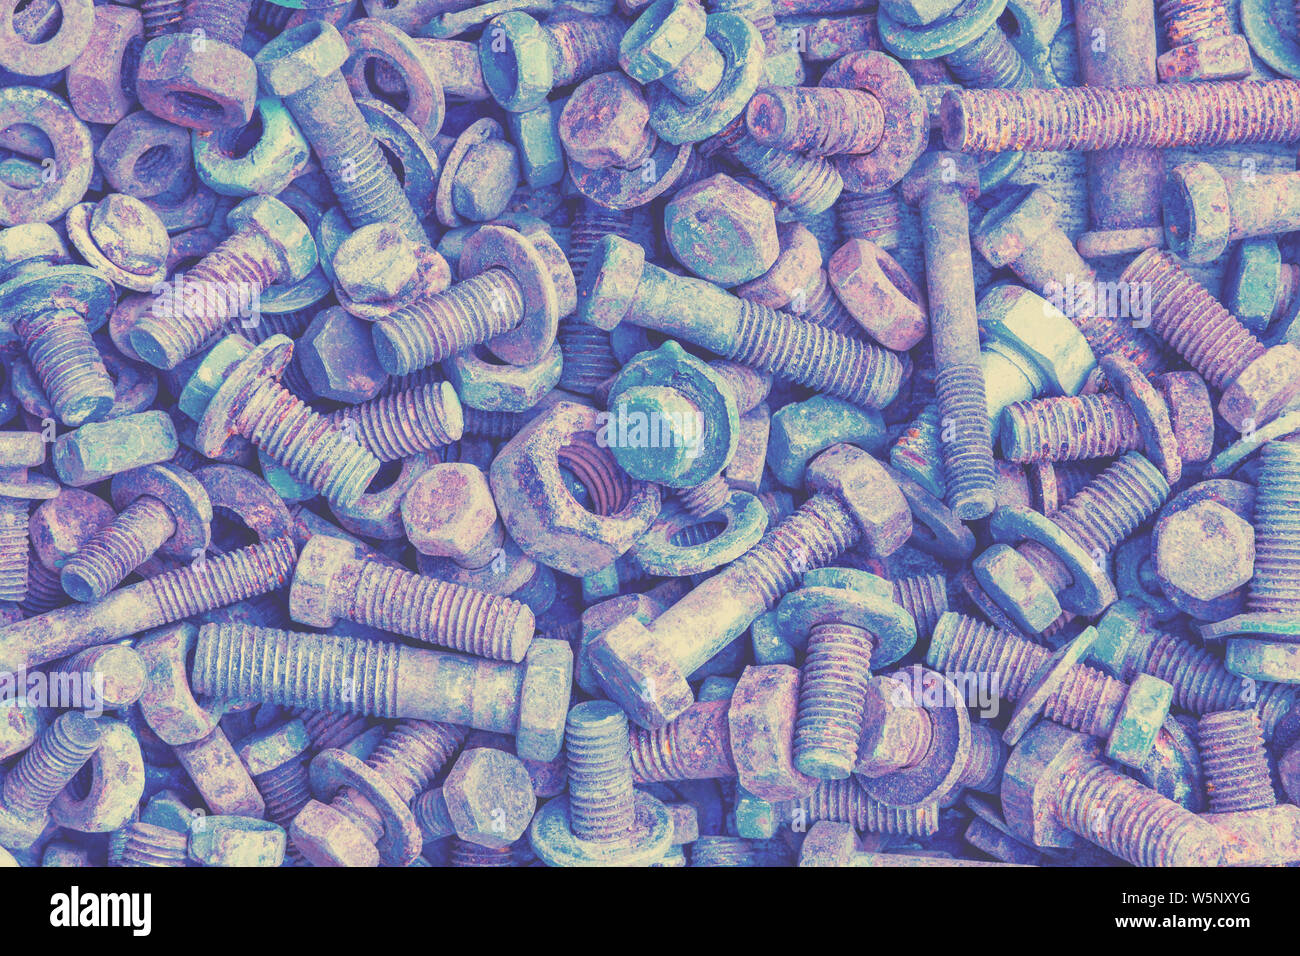 Abstract grunge metal background from old rusty bolts, screws, nuts, and washers Stock Photo